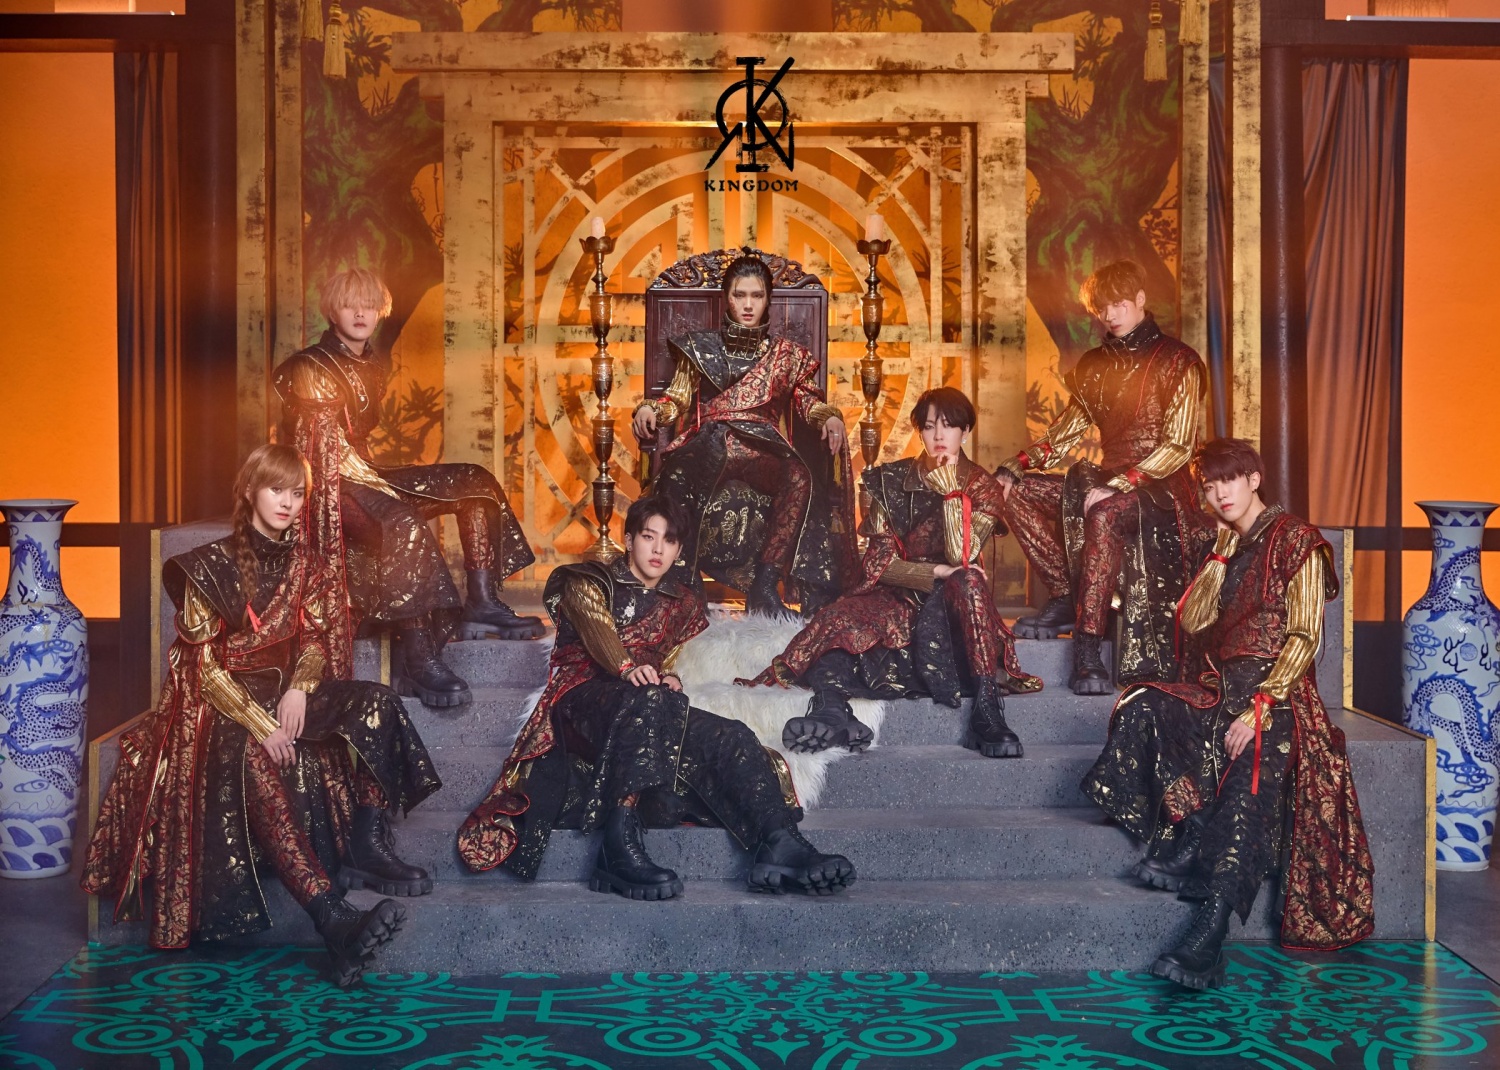 'Fantasy Idol' KINGDOM, new album group concept revealed... Chiwoo-centered worldview